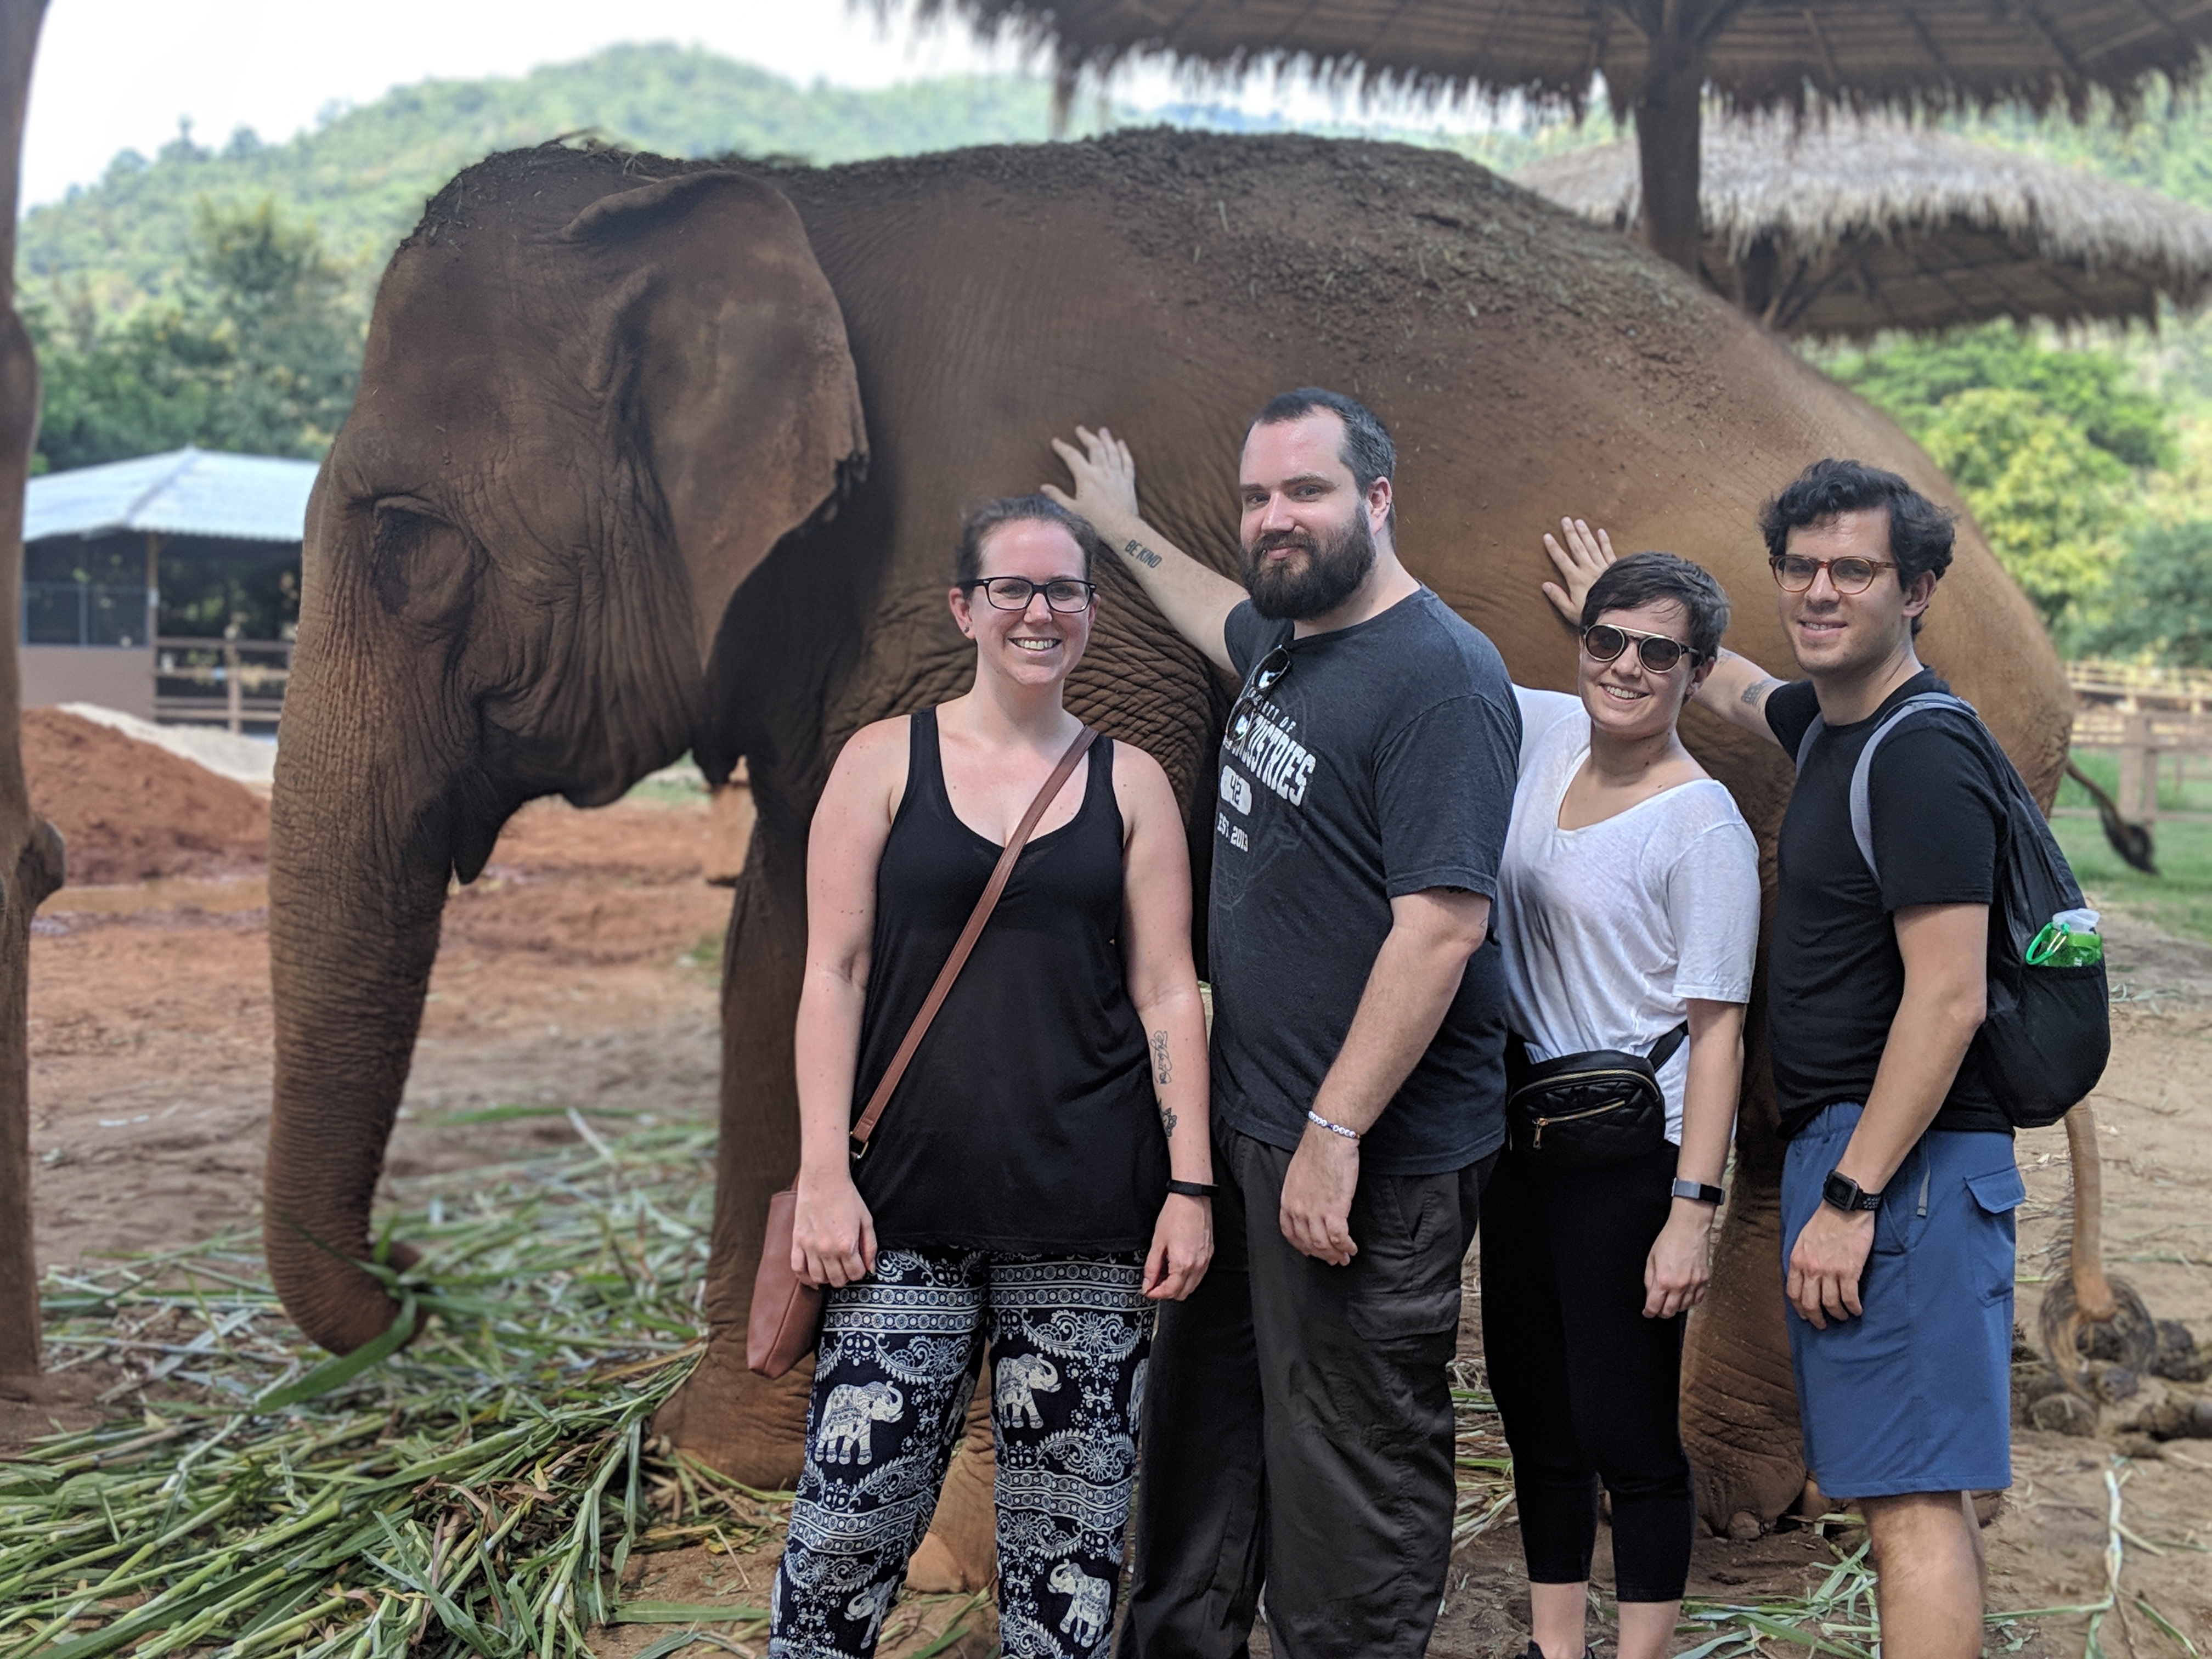 Hanging out with elephants